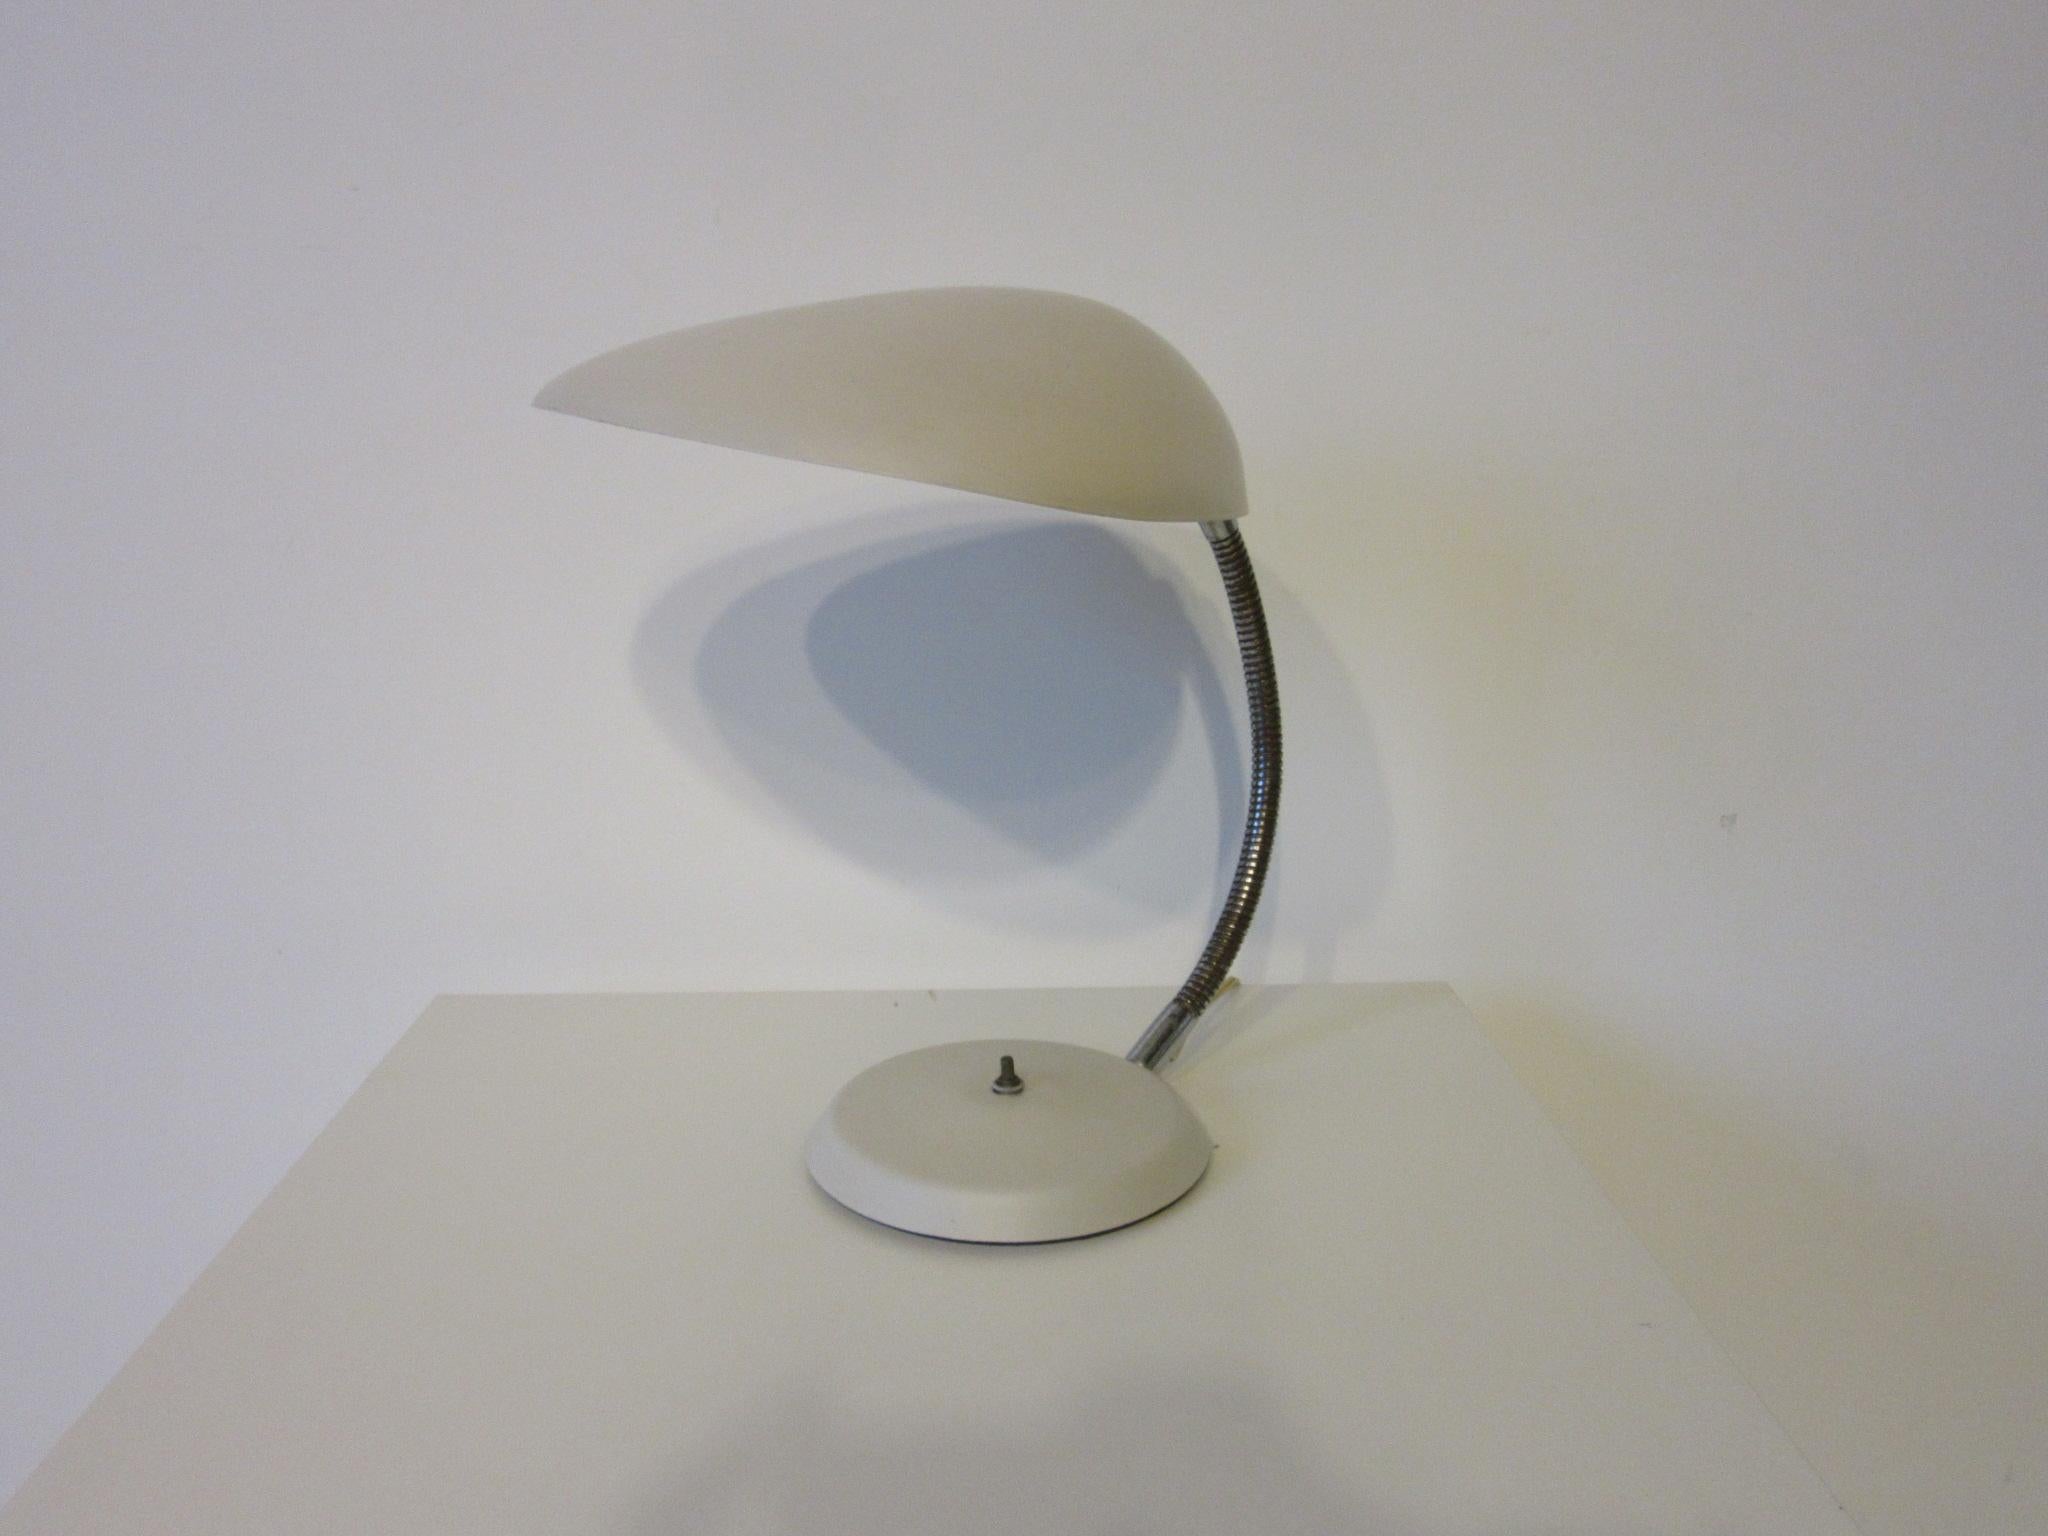 A vintage Cobra lamp with a satin off white finish to the metal shade and base , push button switch and satin chrome flexible arm . One of Greta Magnusson - Grossman's most iconic designs for The Ralph O. Smith Modern lighting company catalog model